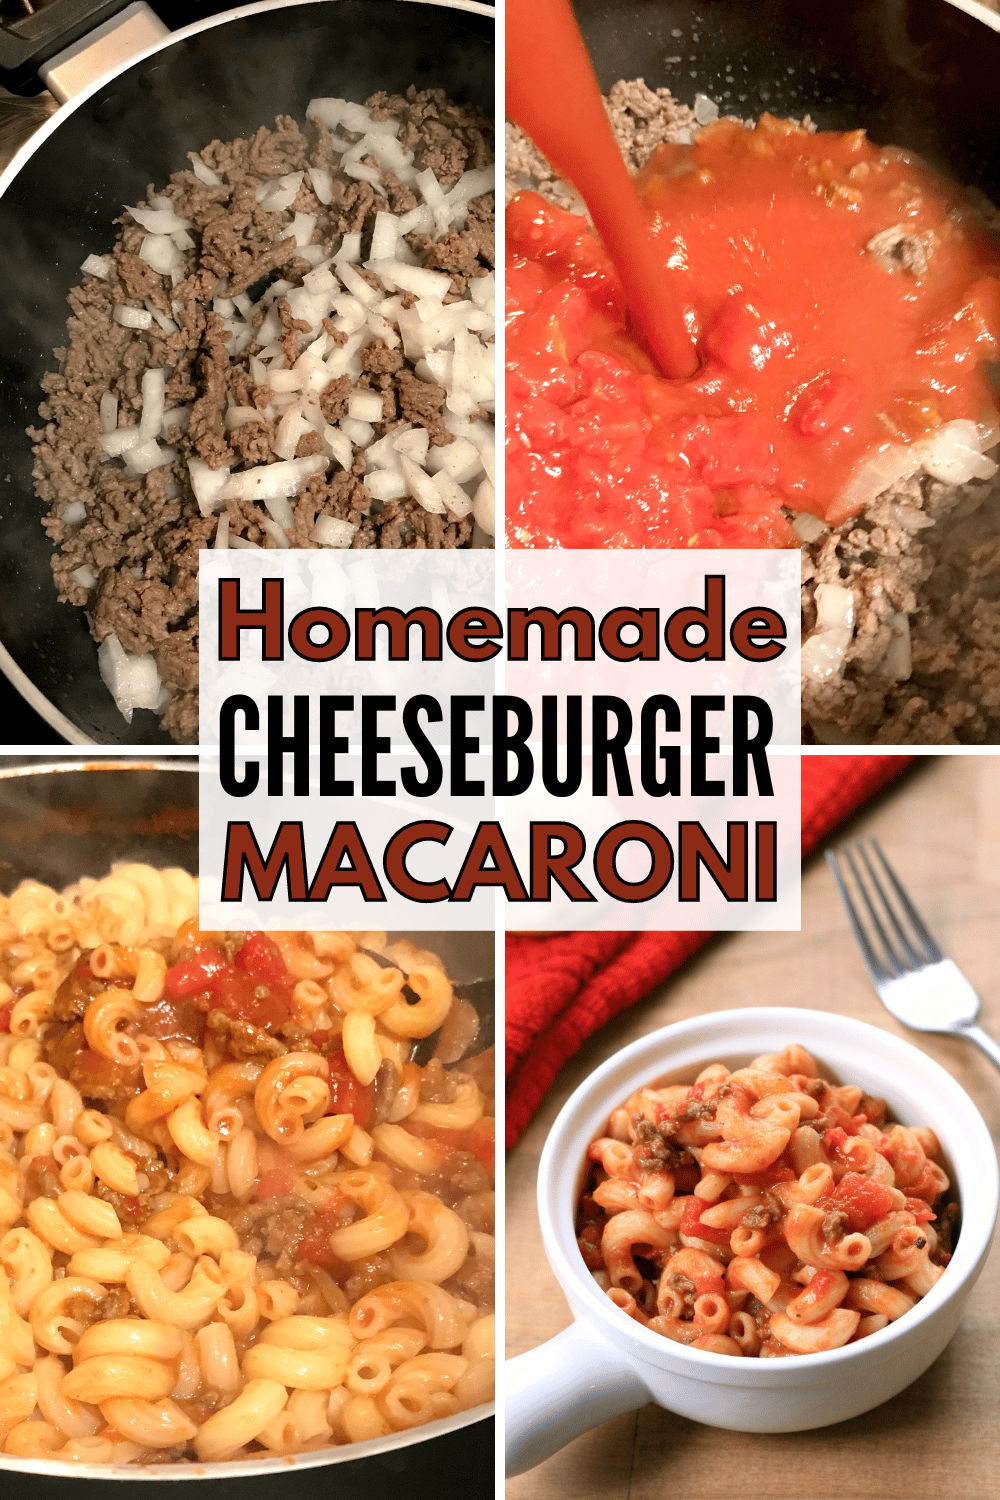 This homemade cheeseburger macaroni is so easy to make and is the perfect weeknight dinner! It's flavorful and will be a hit with the family! #homemadecheeseburgermacaroni #cheeseburger #macaroni #dinnerrecipe via @wondermomwannab